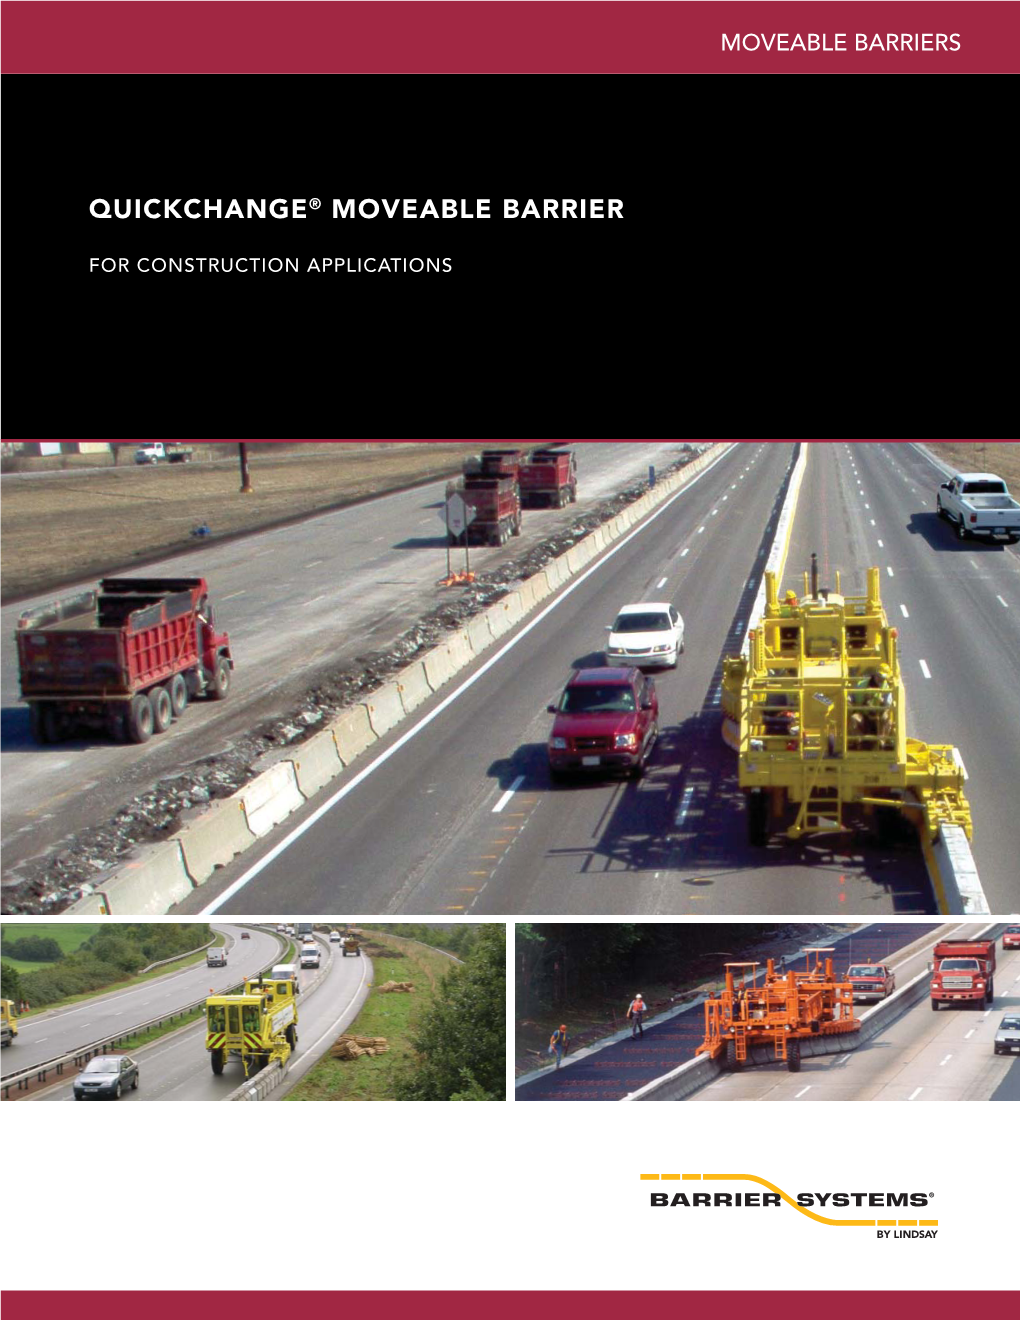 Quickchange® Moveable Barrier